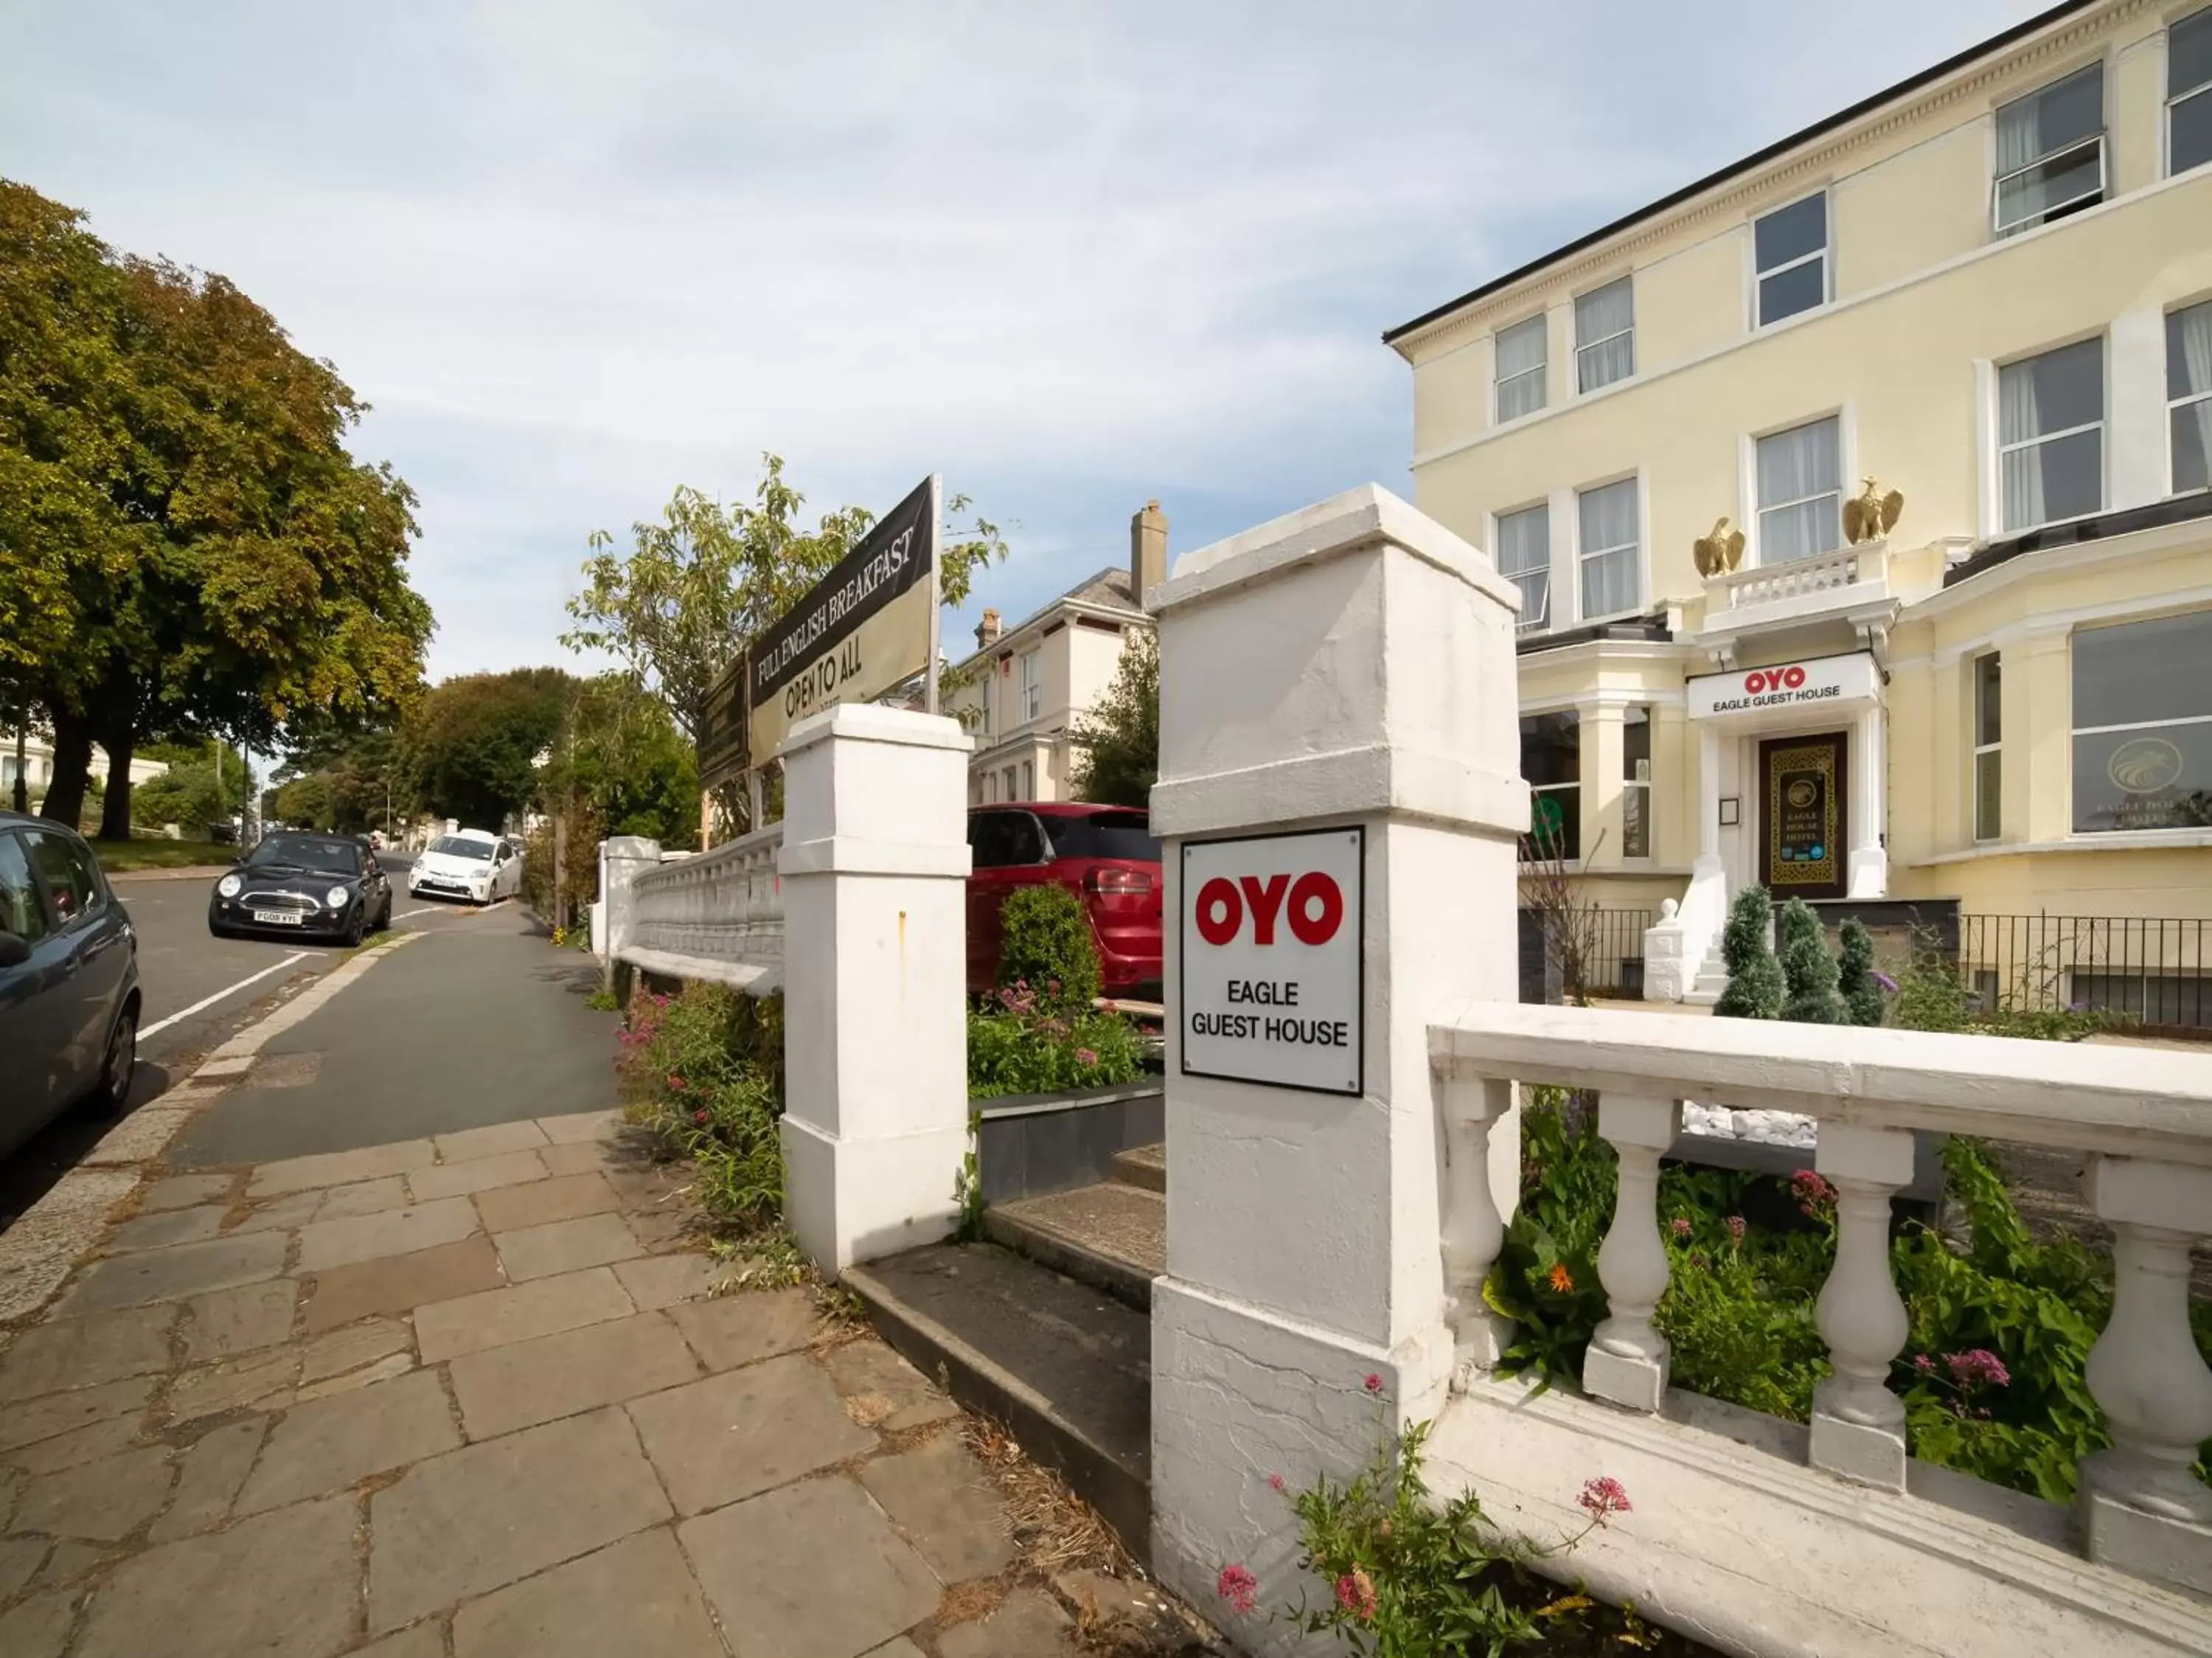 Property Building in OYO Eagle House Hotel, St Leonards Hastings